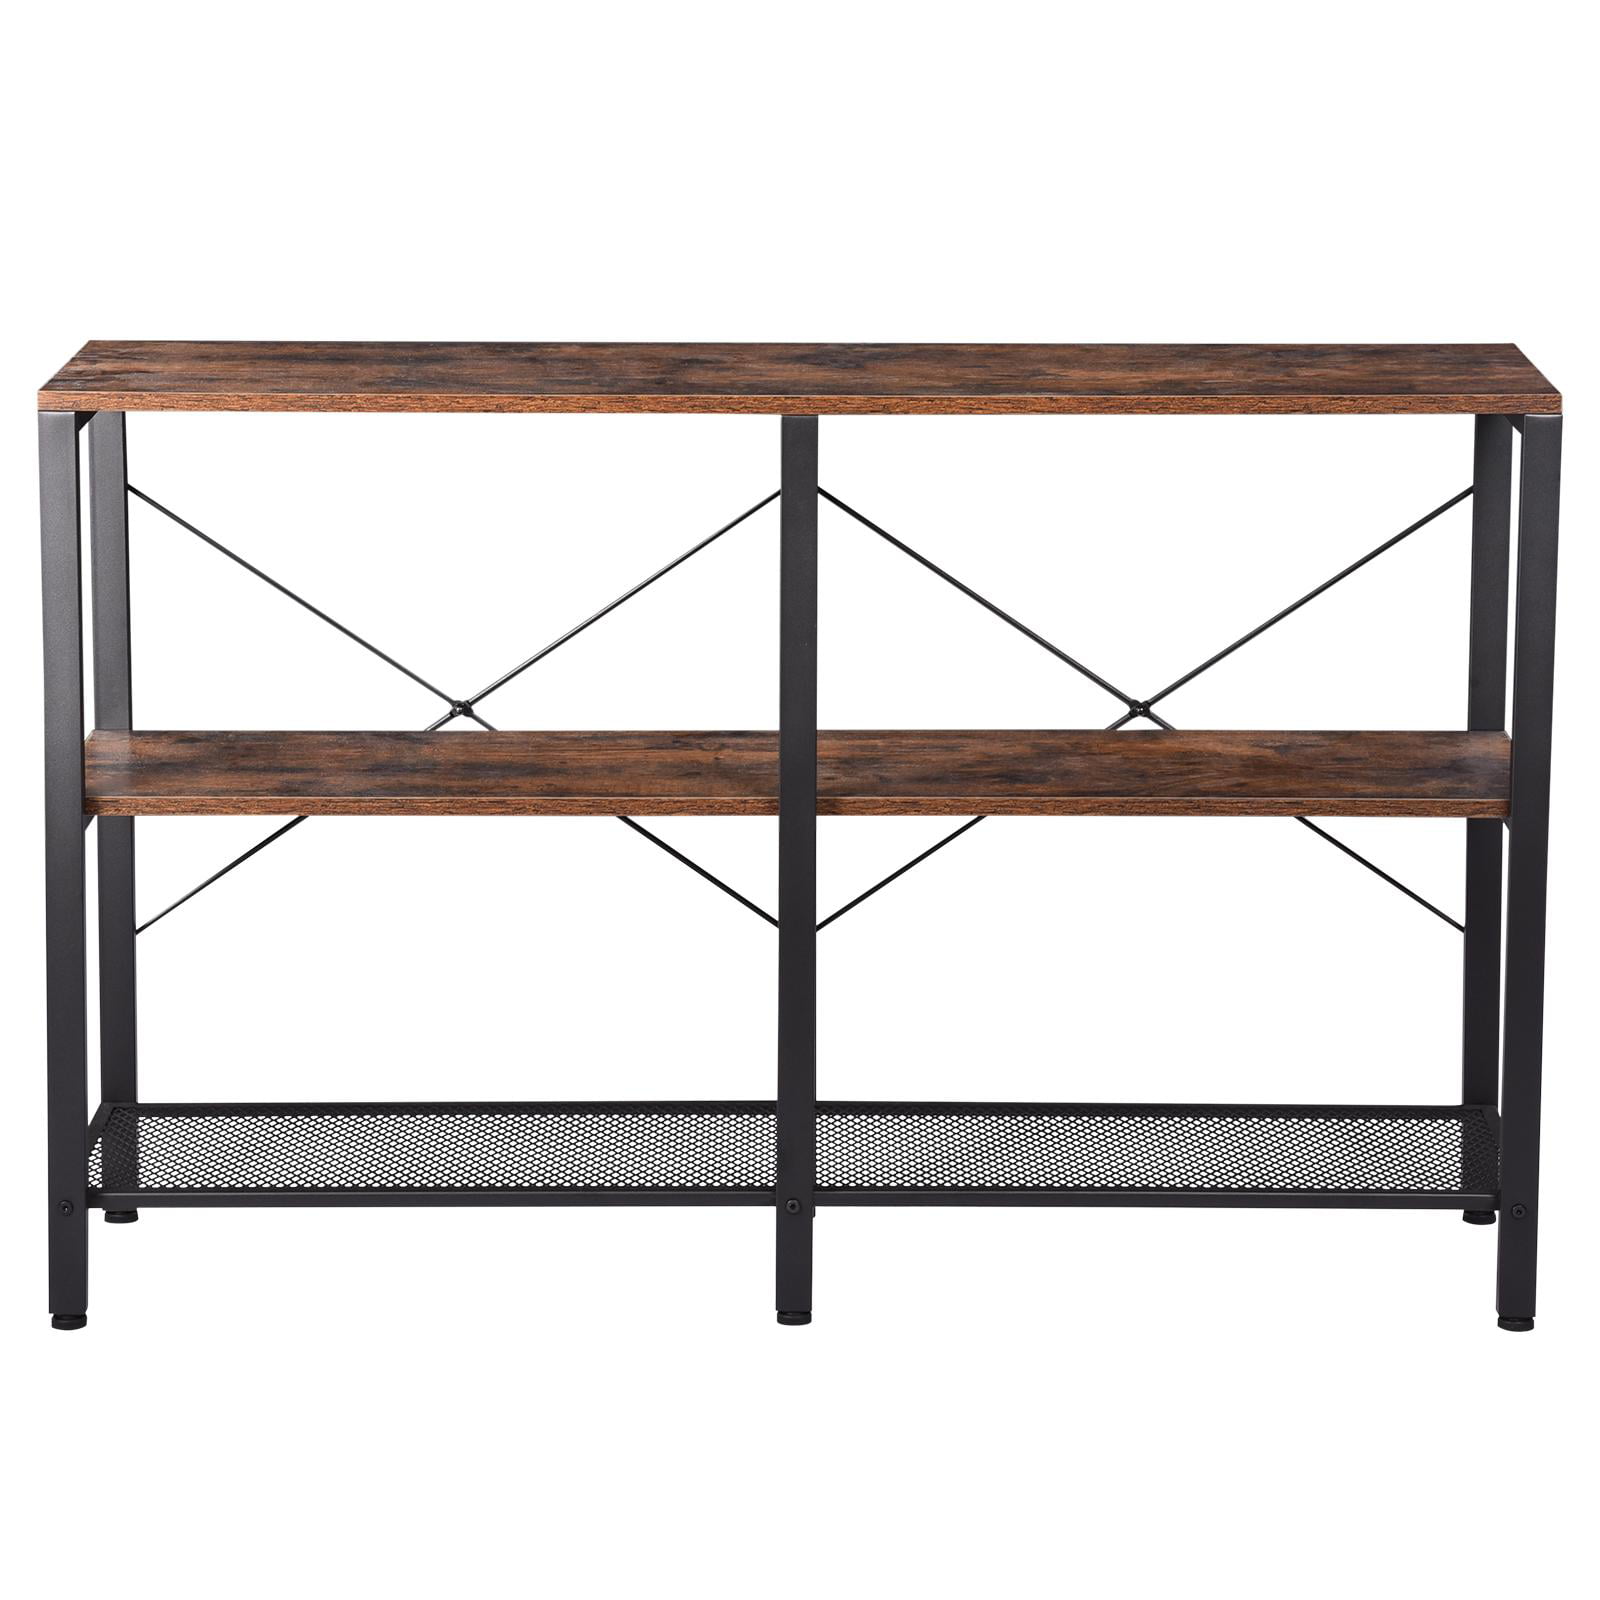 47‘'TV Stand Console Sofa Table & Industrial Console Table 3-Tier Rustic Console Entryway/Hallway Table with Storage for Living Room Open Bookshelf in Bedroom Entryway,Brown Oak 